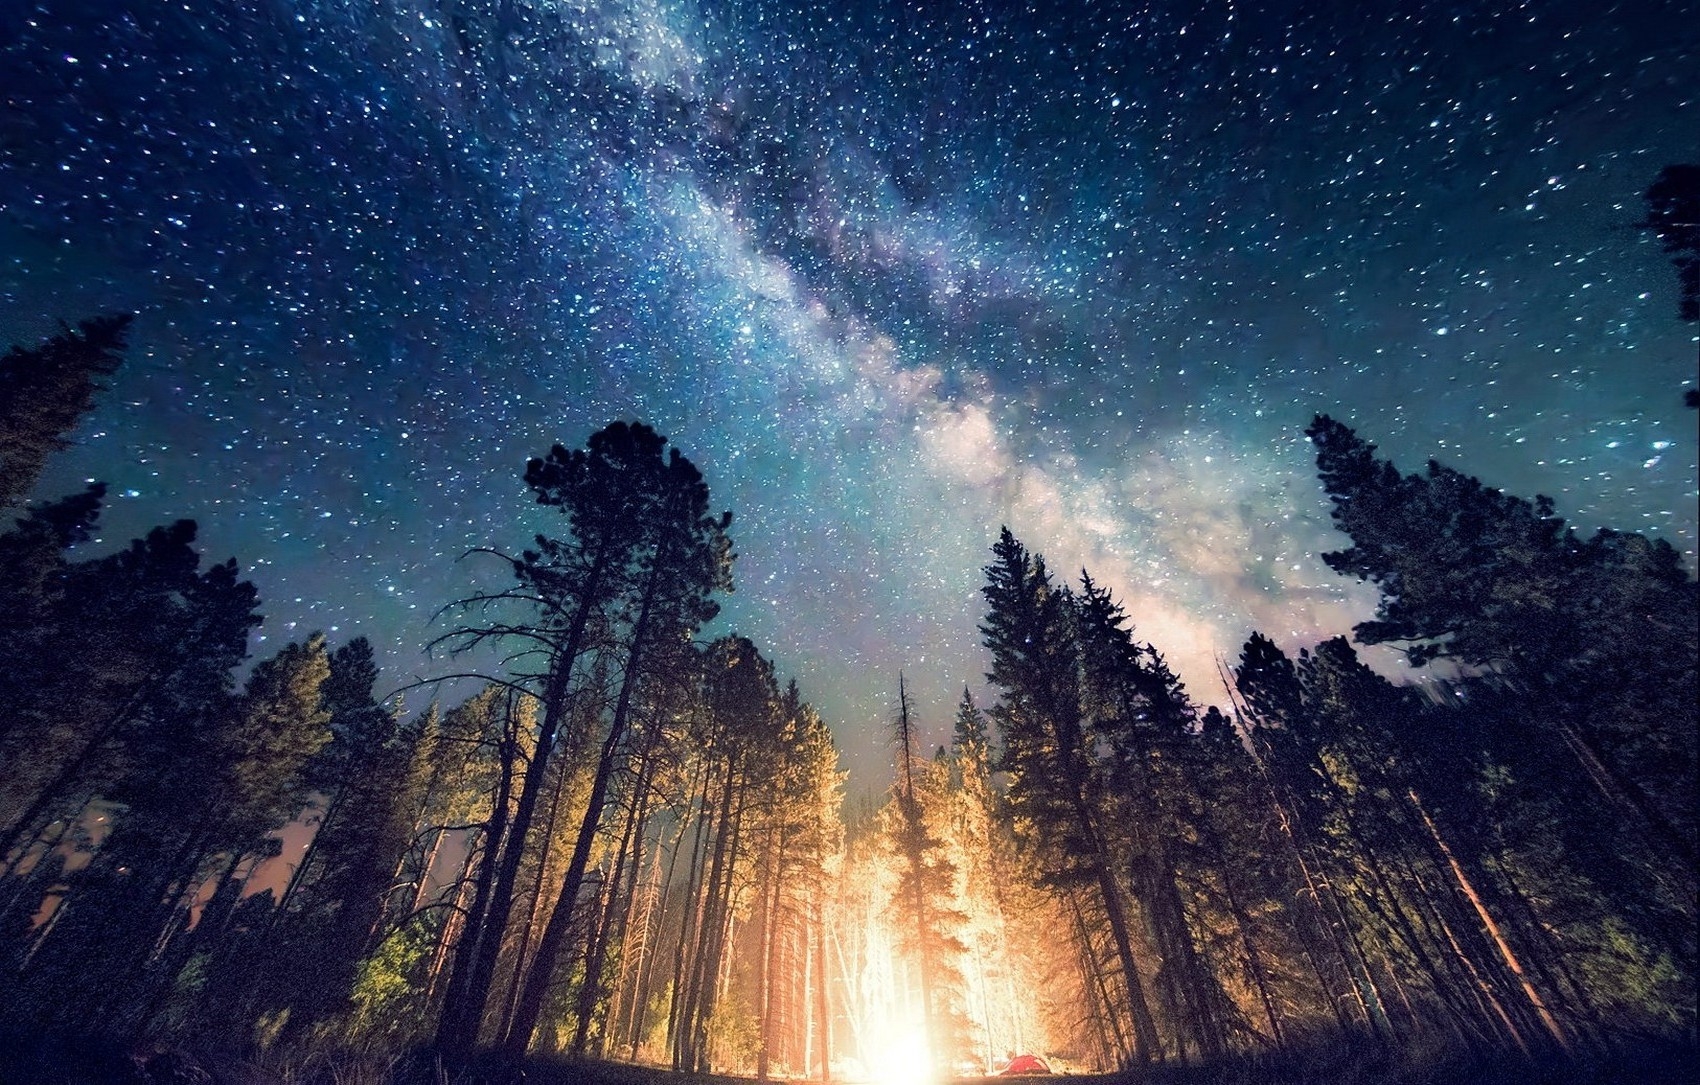 Long exposure photo of a starry night in a forst of pinetrees